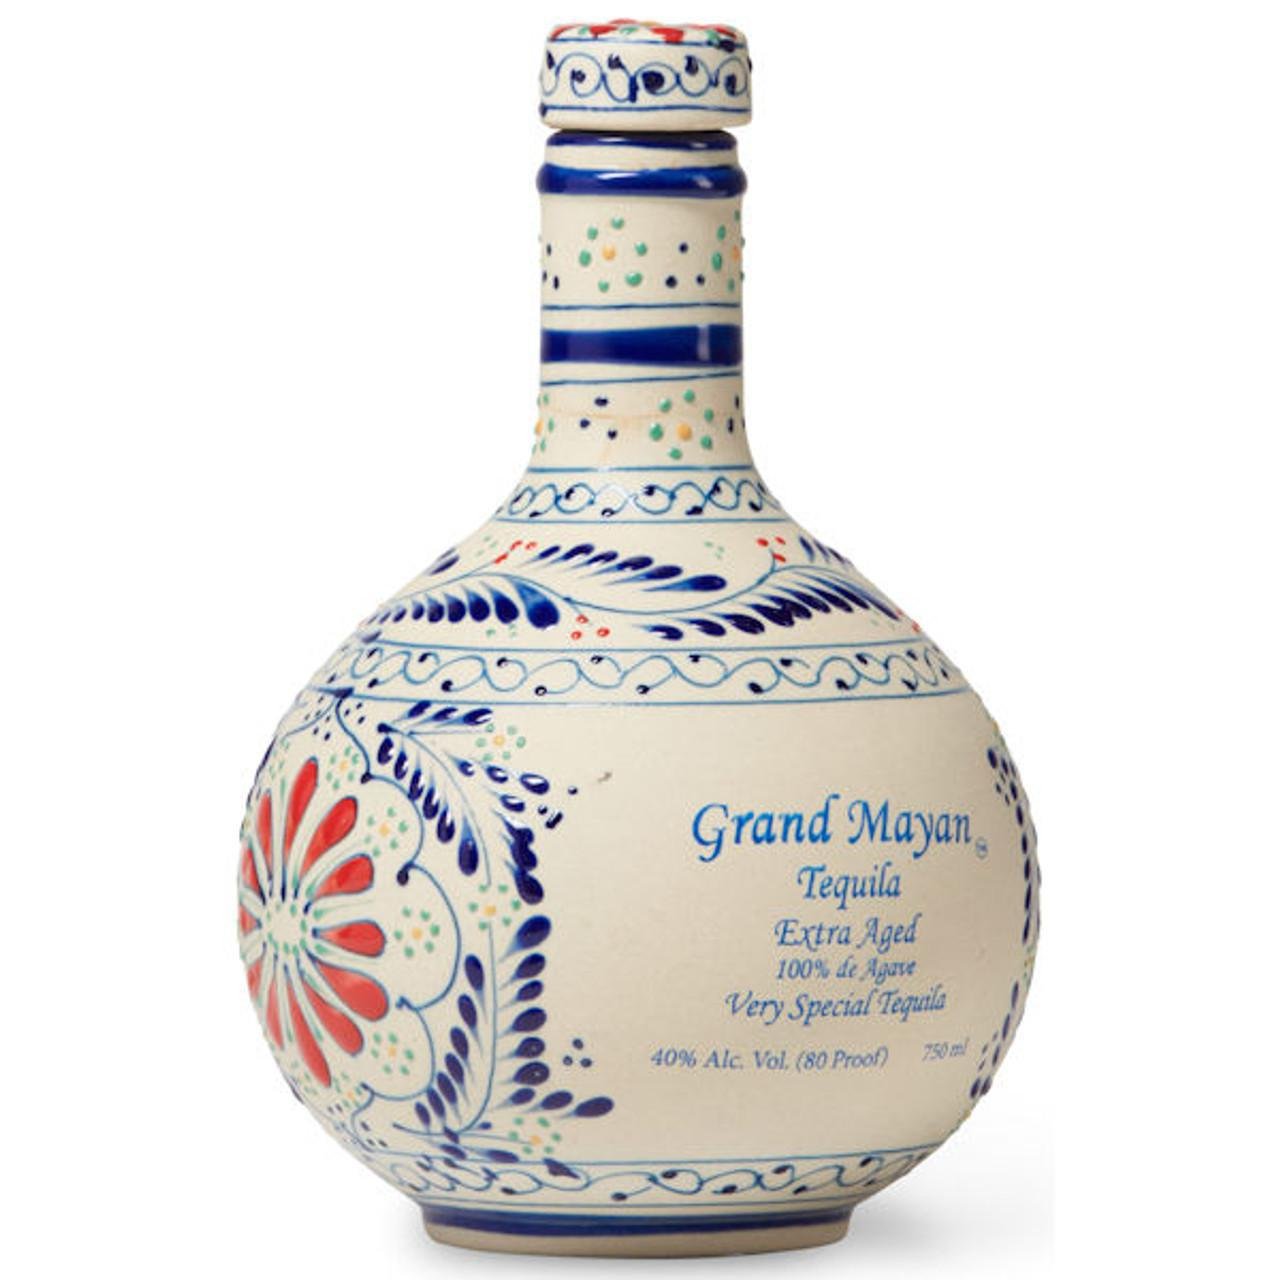 Grand Mayan - 'Extra Aged' Tequila (750ML) - The Epicurean Trader